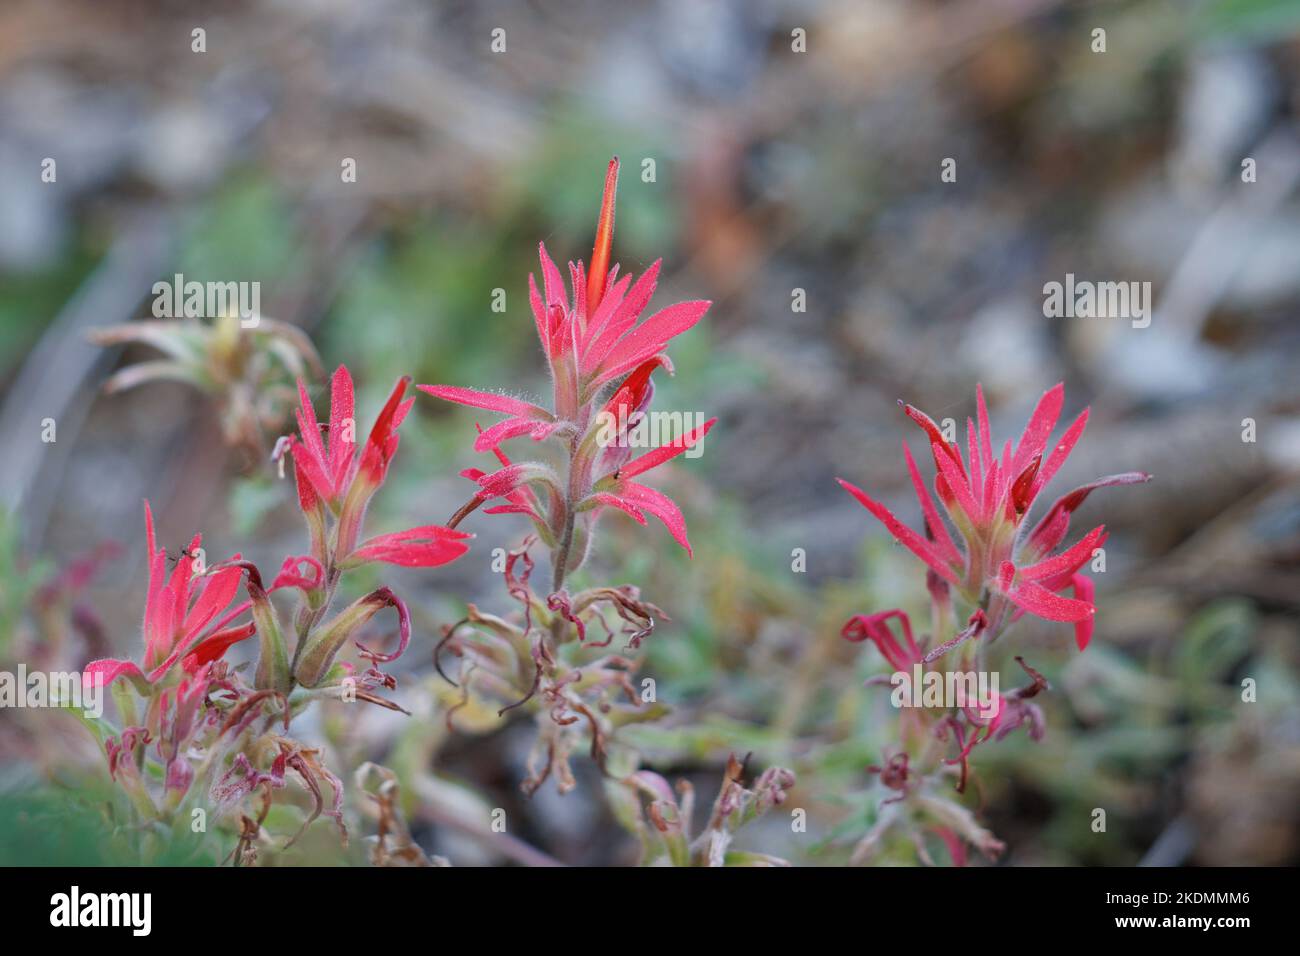 Red flowering racemose spike inflorescences of Castilleja Applegatei, Orobanchaceae, native perennial herb in the San Emigdio Mountains, Autumn. Stock Photo